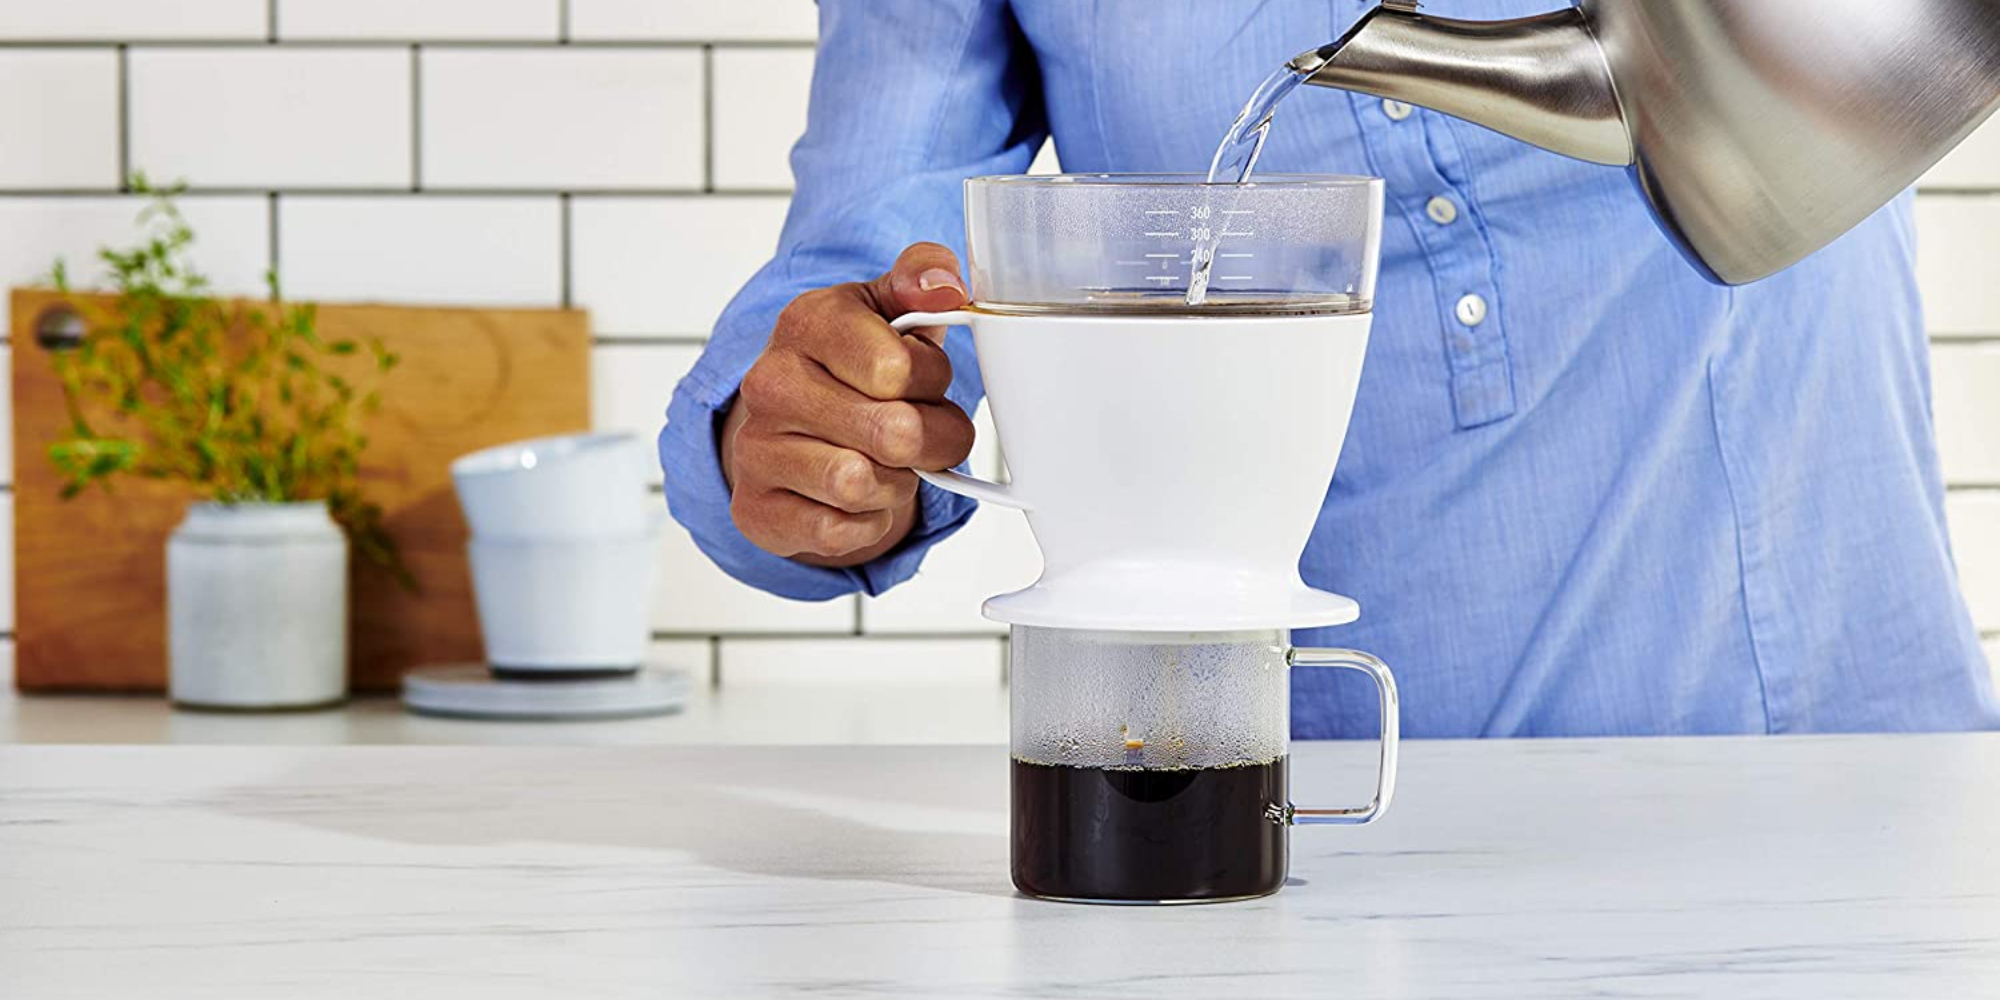 https://9to5toys.com/wp-content/uploads/sites/5/2021/04/oxo-brew-pour-over.jpg